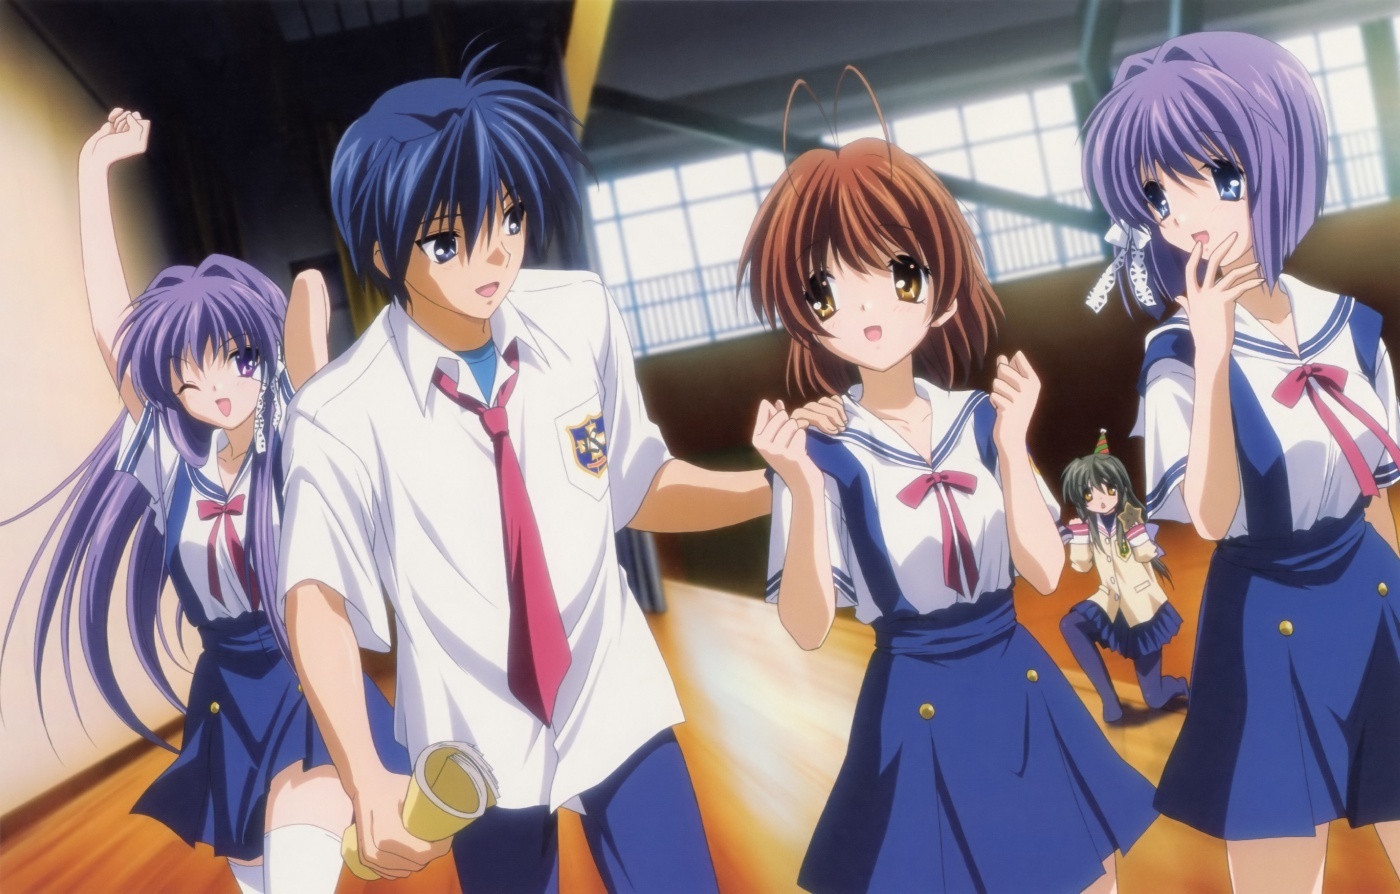 Top 10 Rom-Com Anime [Recommendations] - TheVersatileBlogging -  TheVersatileBlogging